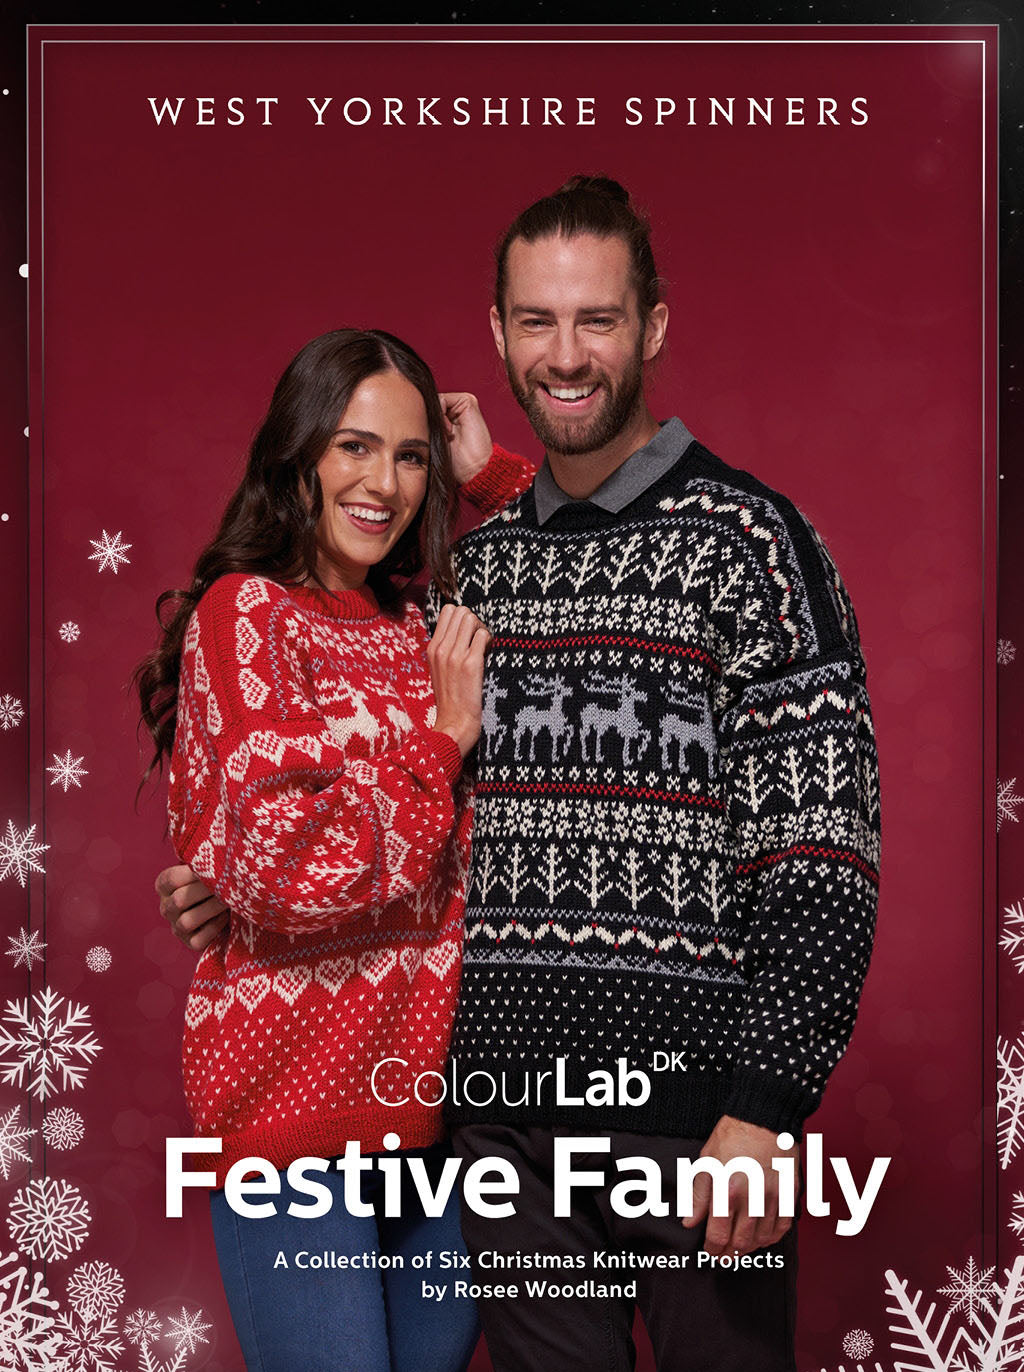 West Yorkshire Spinners Colourlab DK - Festive Family Collection by Rosee Woodland